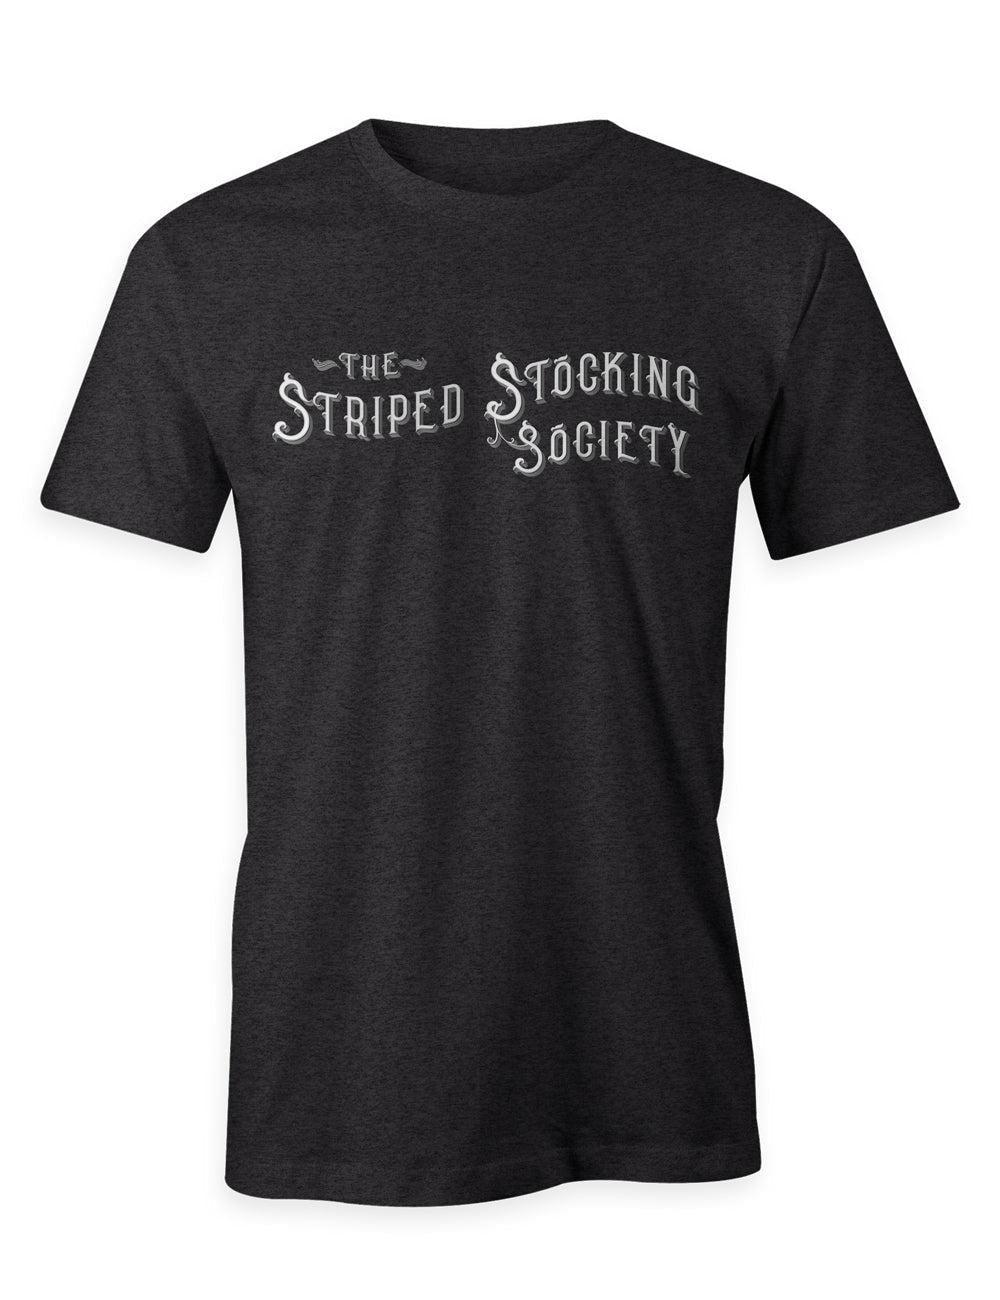 Striped Stocking Society TriBlend Premium Tee | Double Sided | Unisex